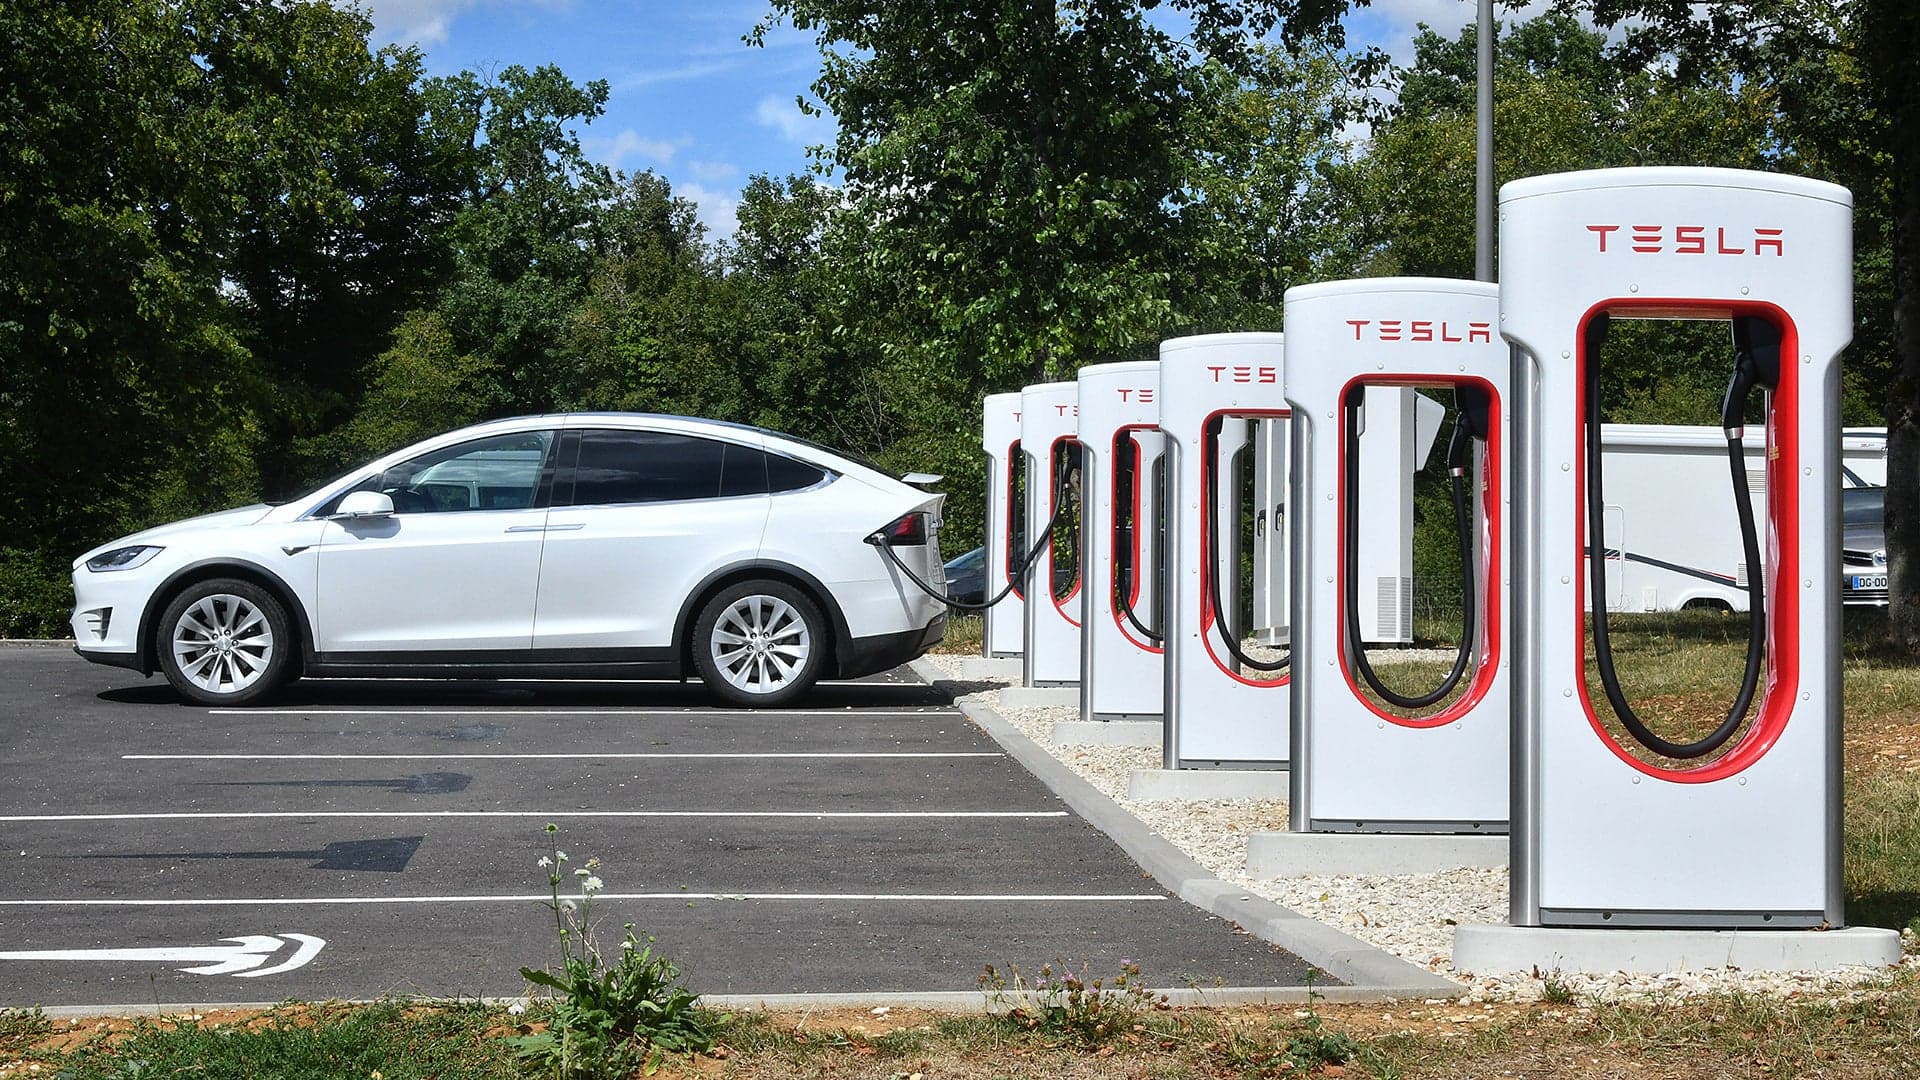 Tesla To Offer 5,000 Free Supercharger Miles For Referrals, Adds Caveats